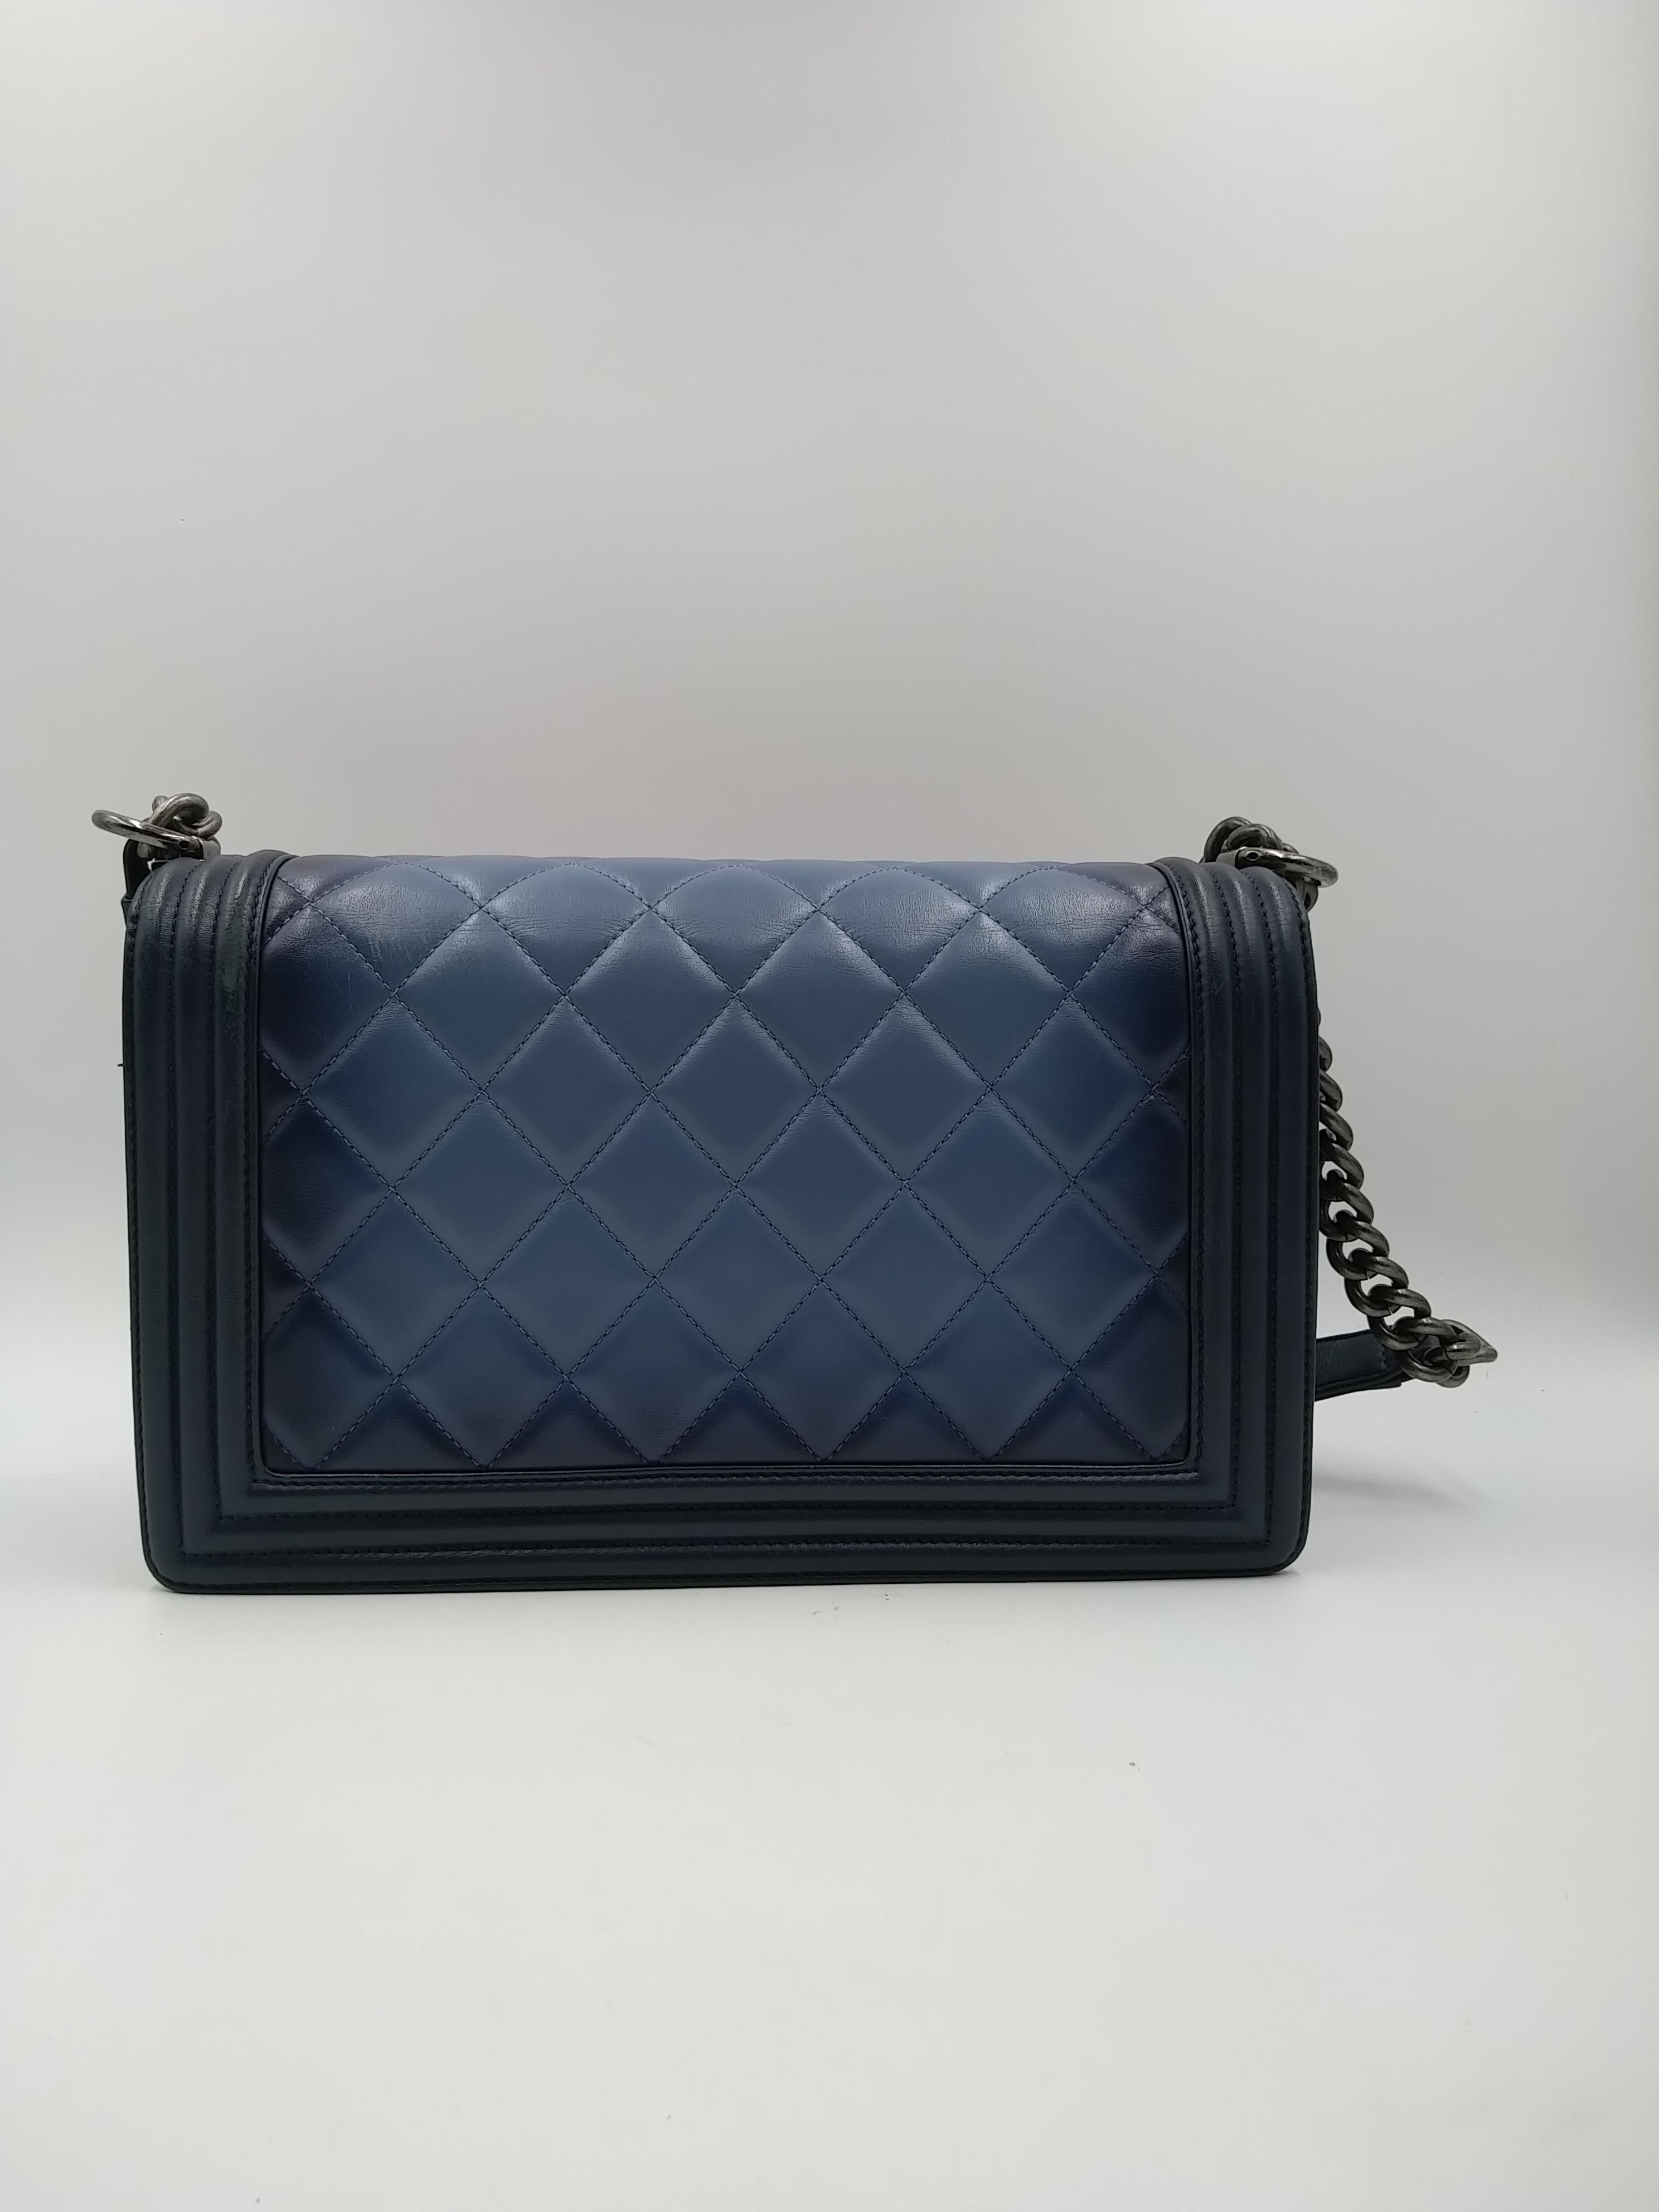 Chanel Blue Ombré Quilted Leather Boy Bag, 2015. This particular bag is the large size of the collection and features a long antique ruthenium chain-link strap with a leather pad that can be used as a long strap or looped around as a shoulder